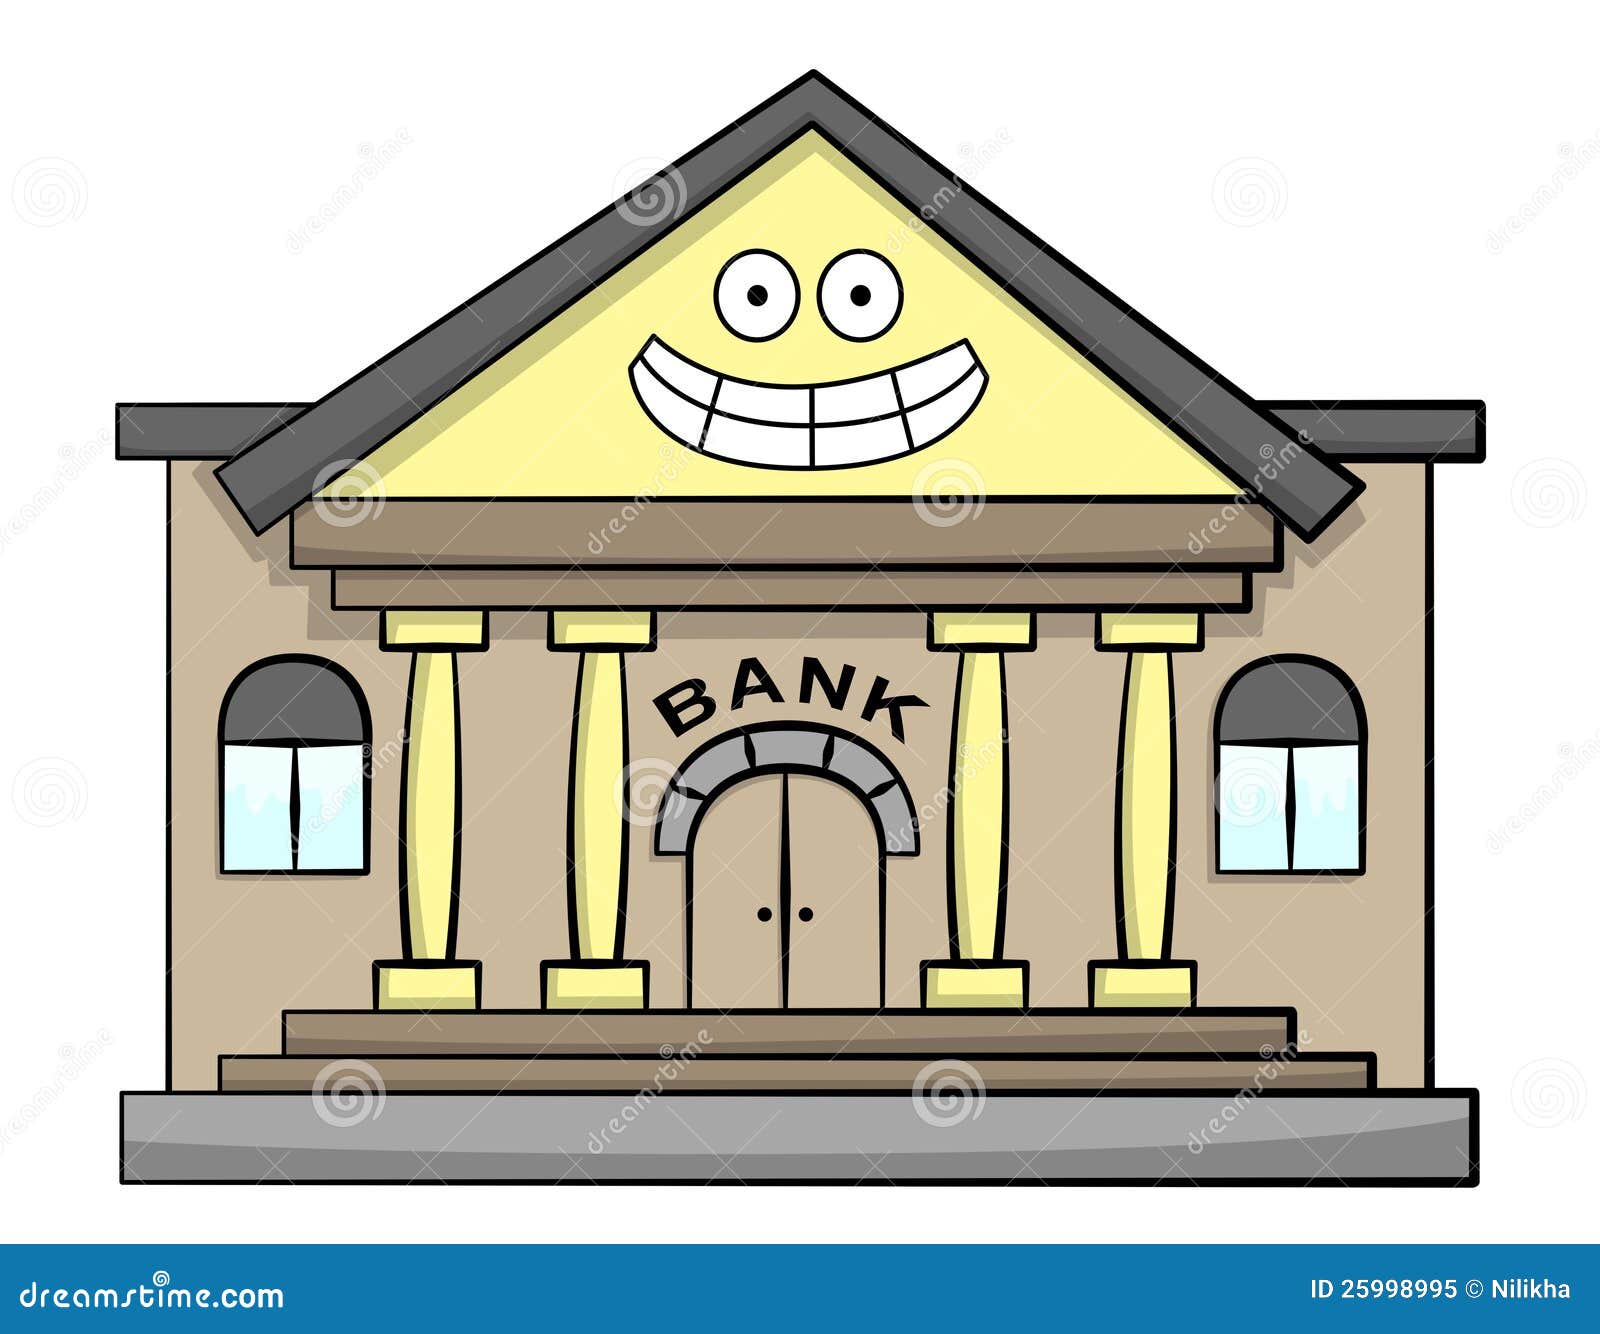 bank clipart pictures - photo #26